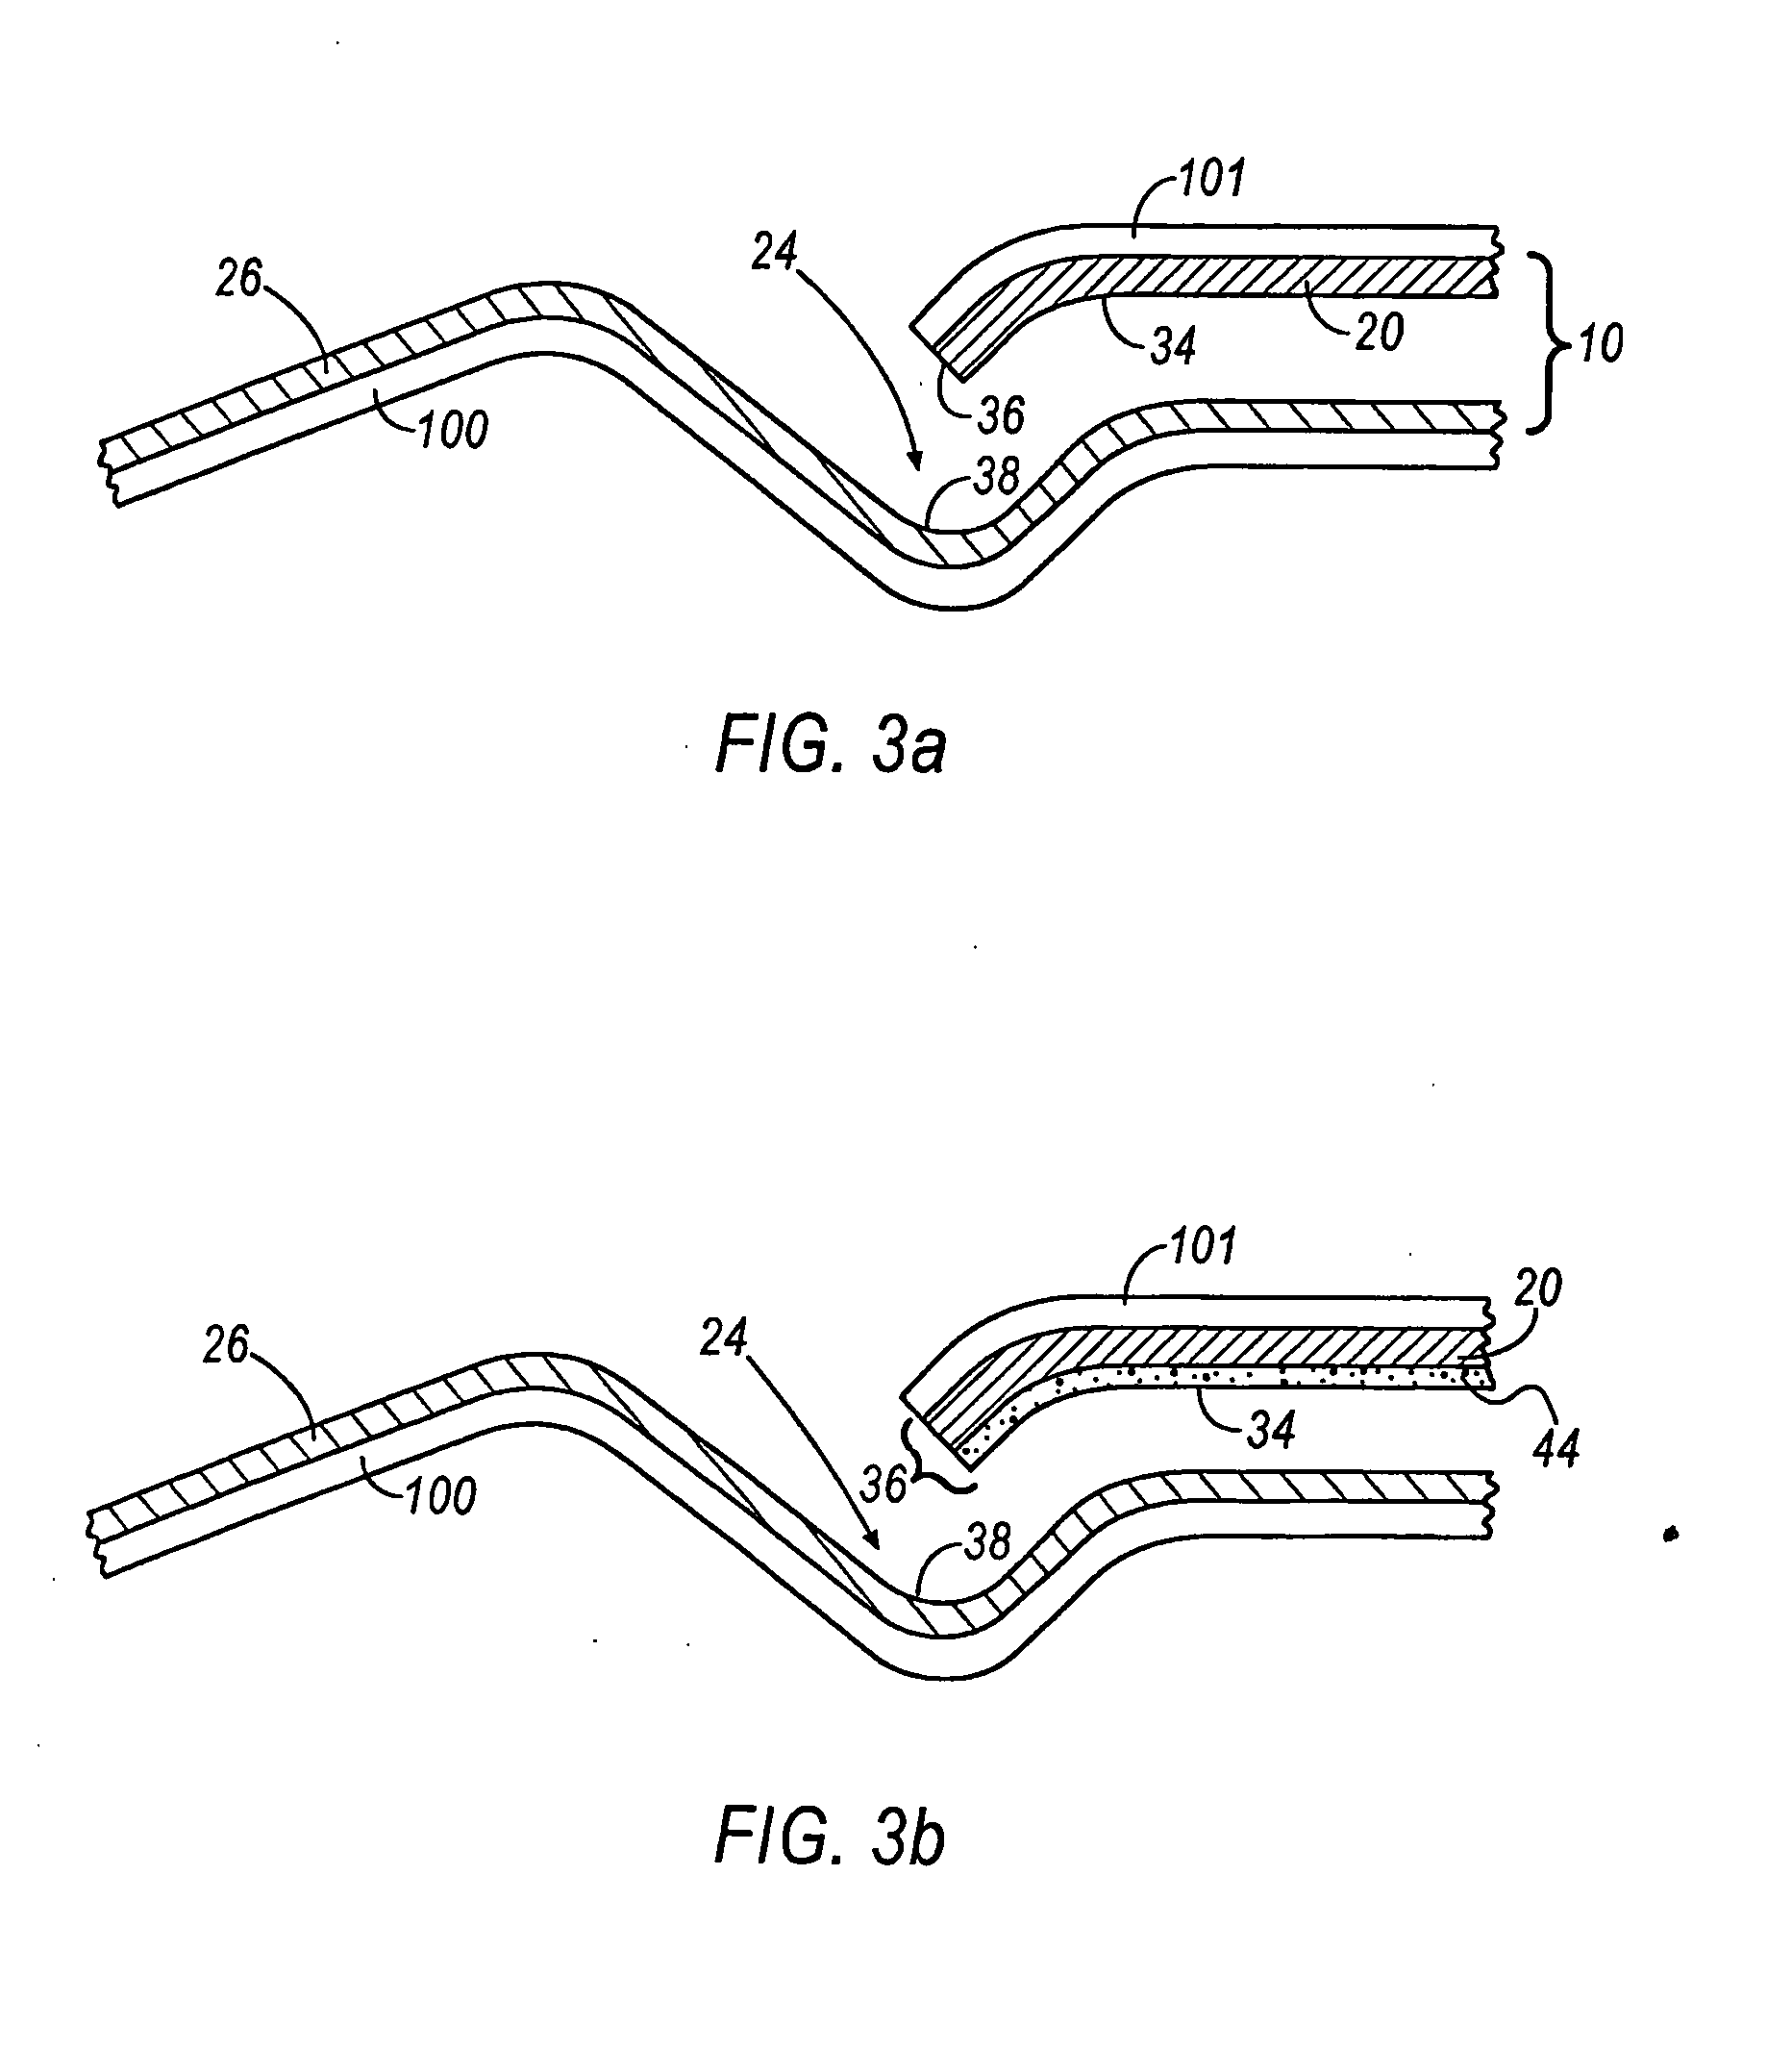 Method of pre-applying a bolster assembly to an interior trim part